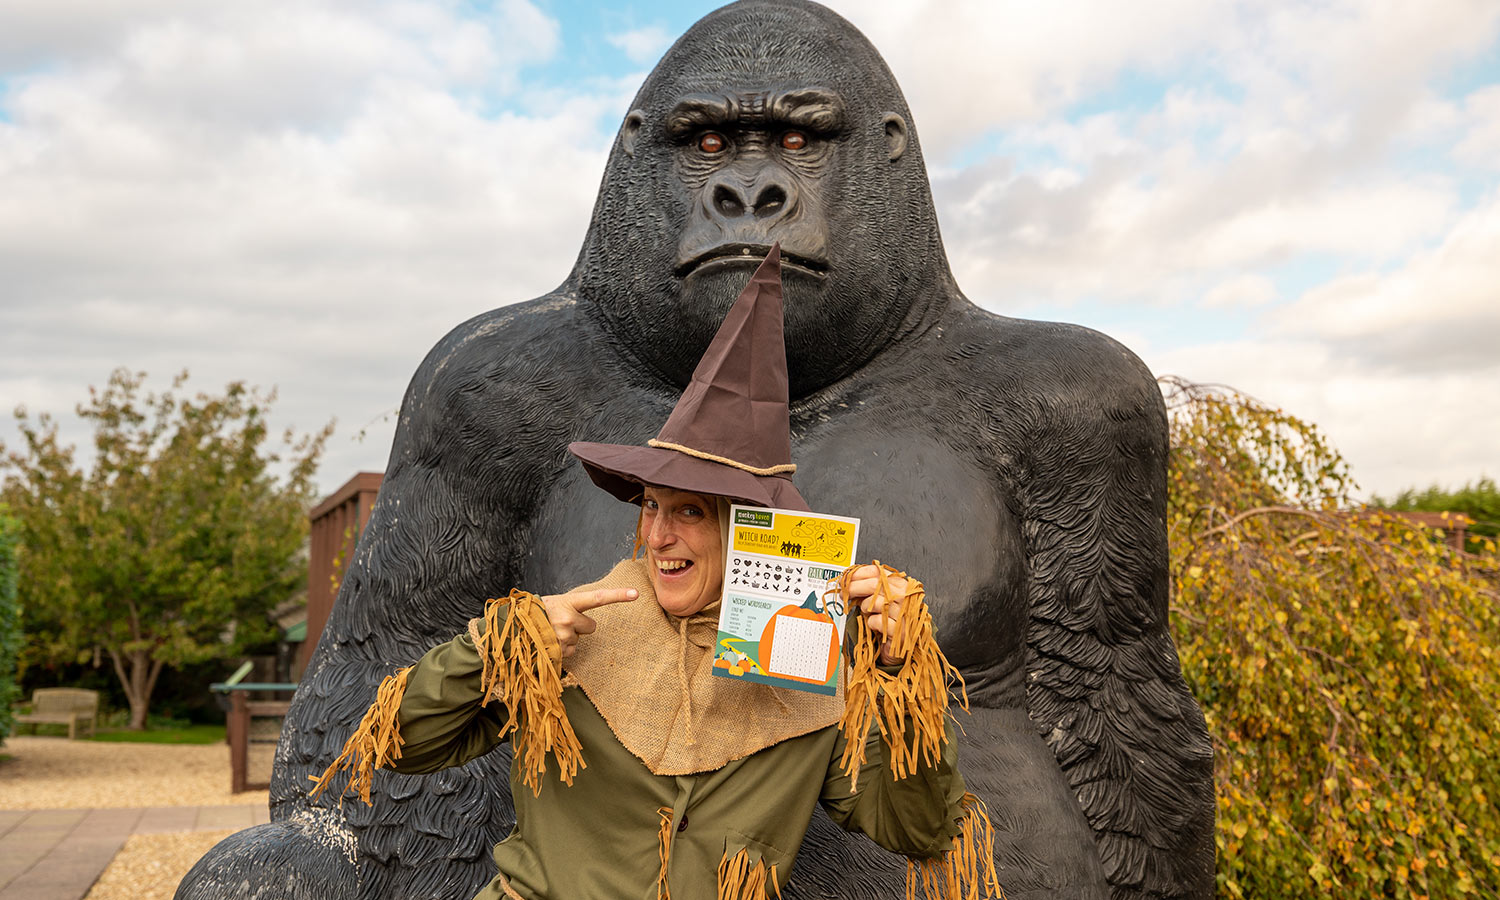 Wizard of oz character holding an activity sheet at Monkey Haven